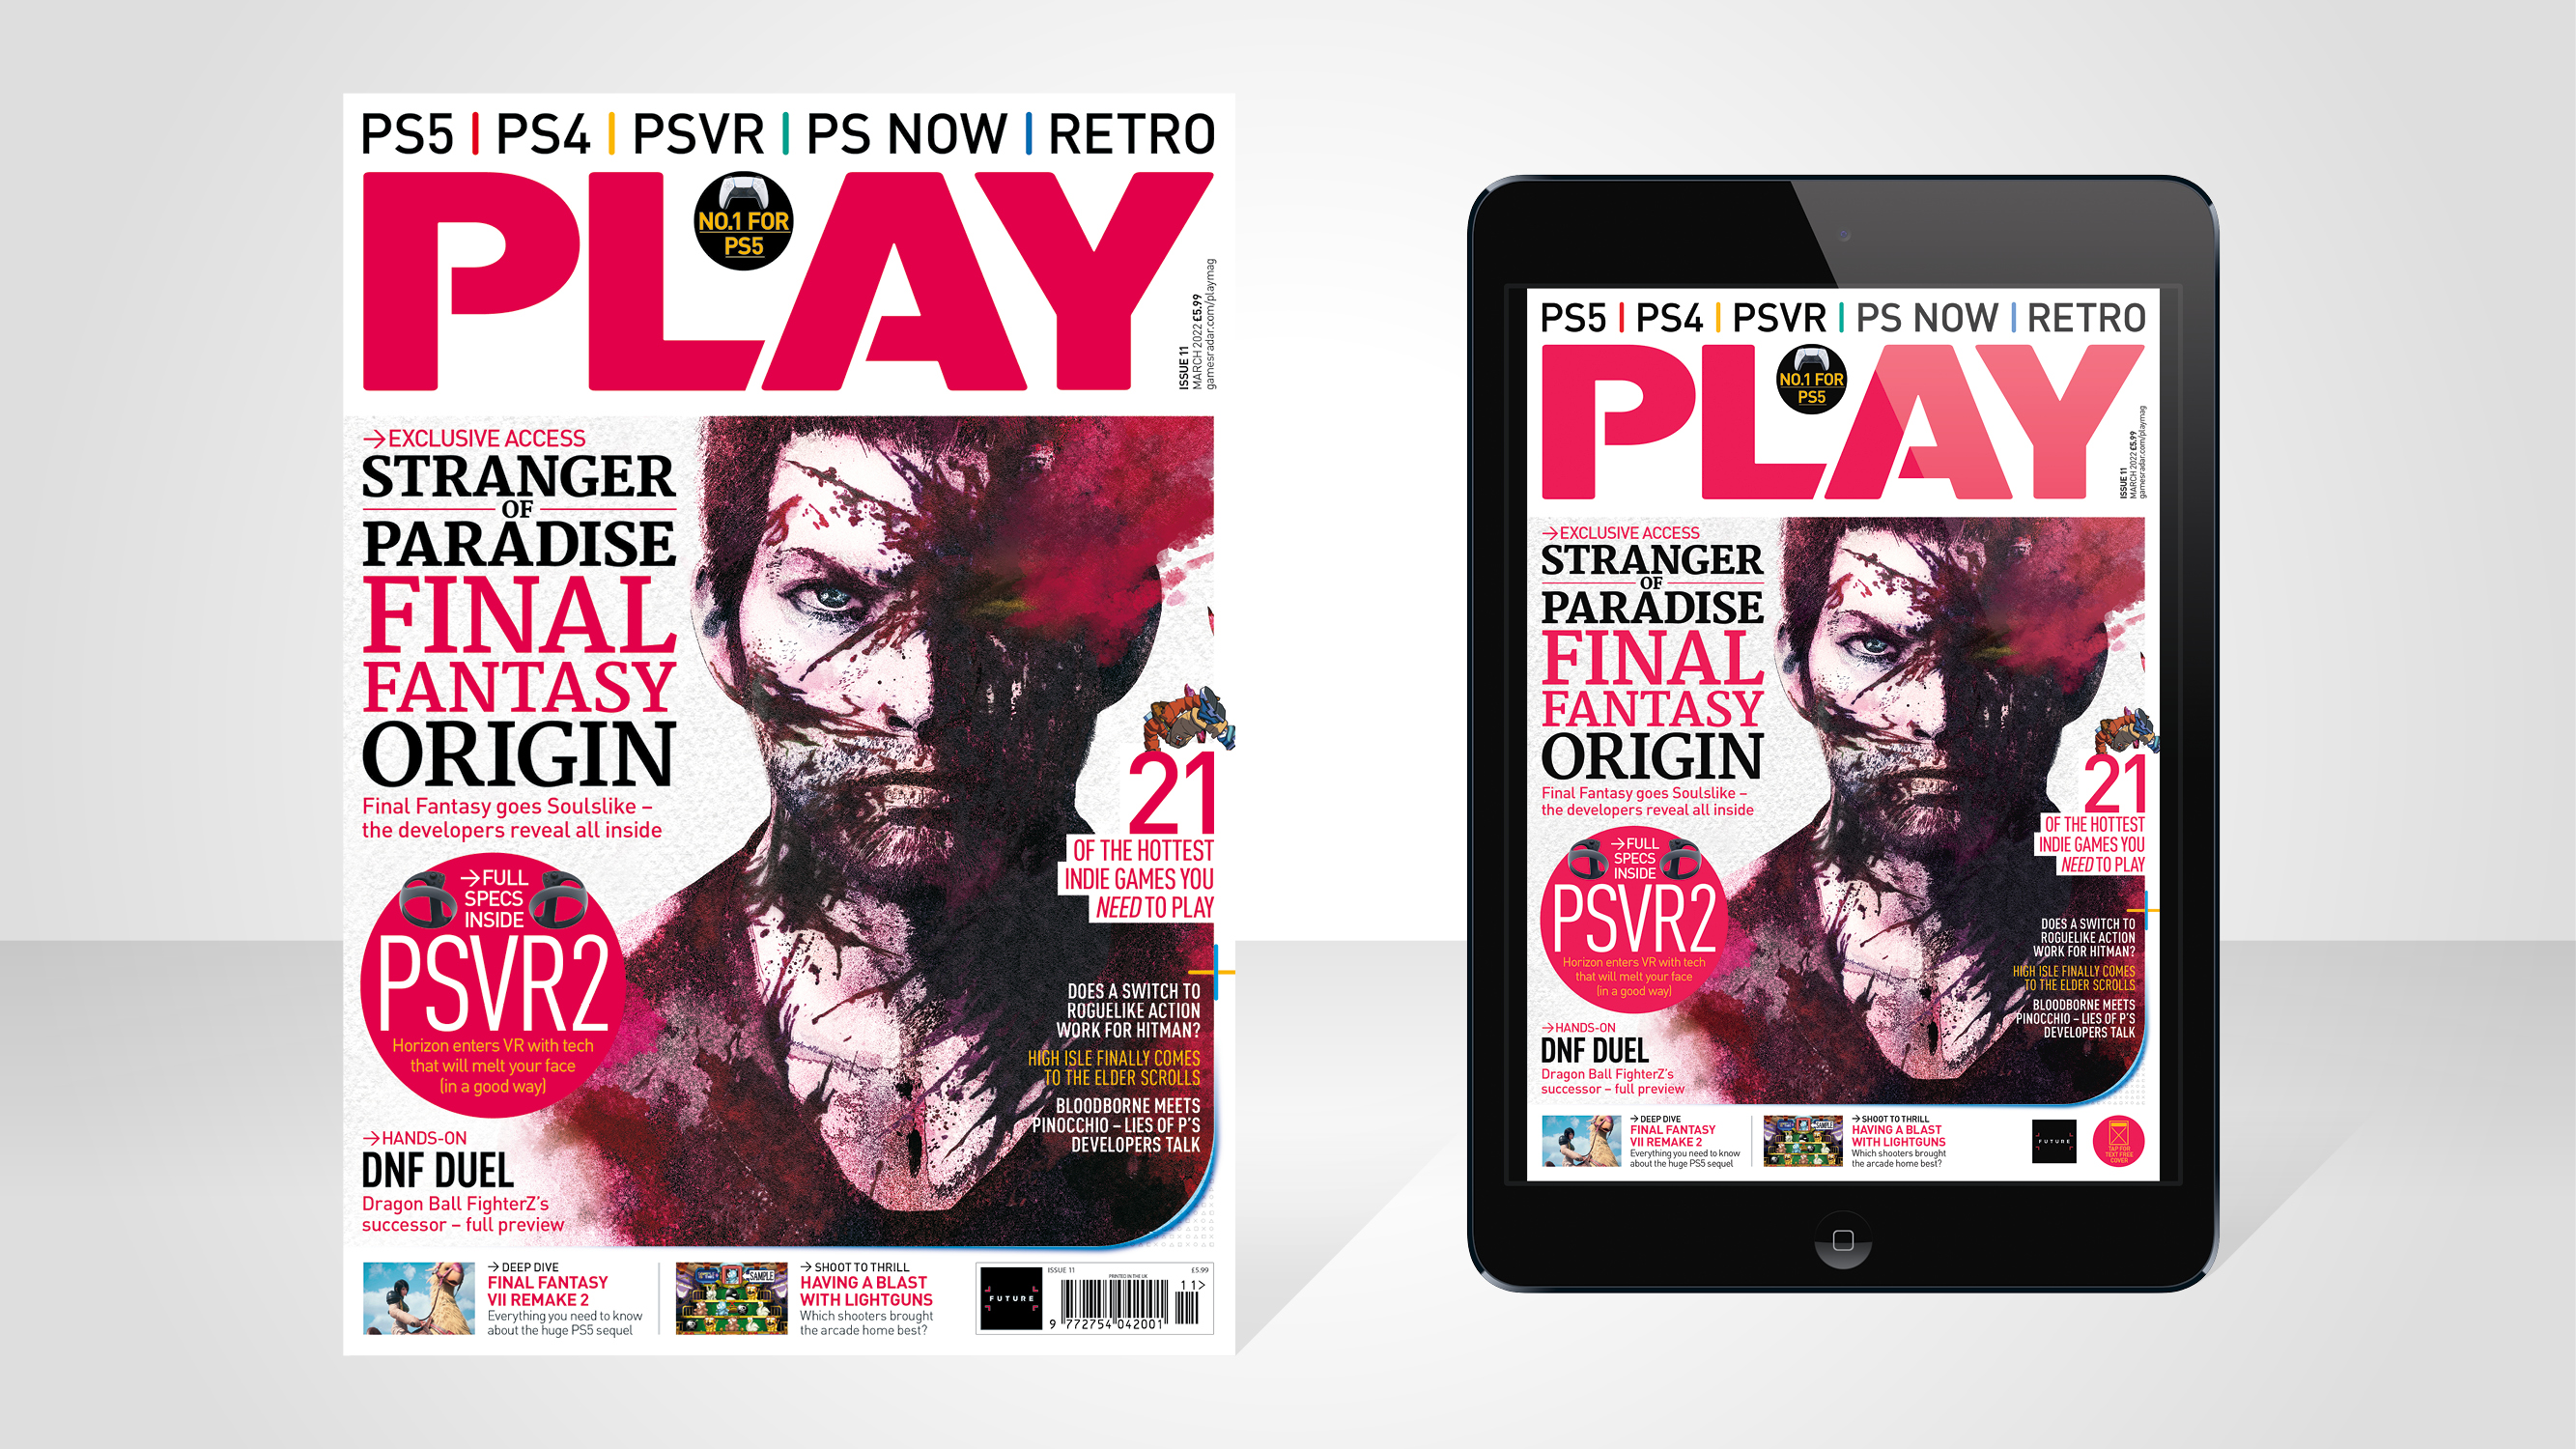 Final Fantasy Origin turns PLAY’s cover to chaos